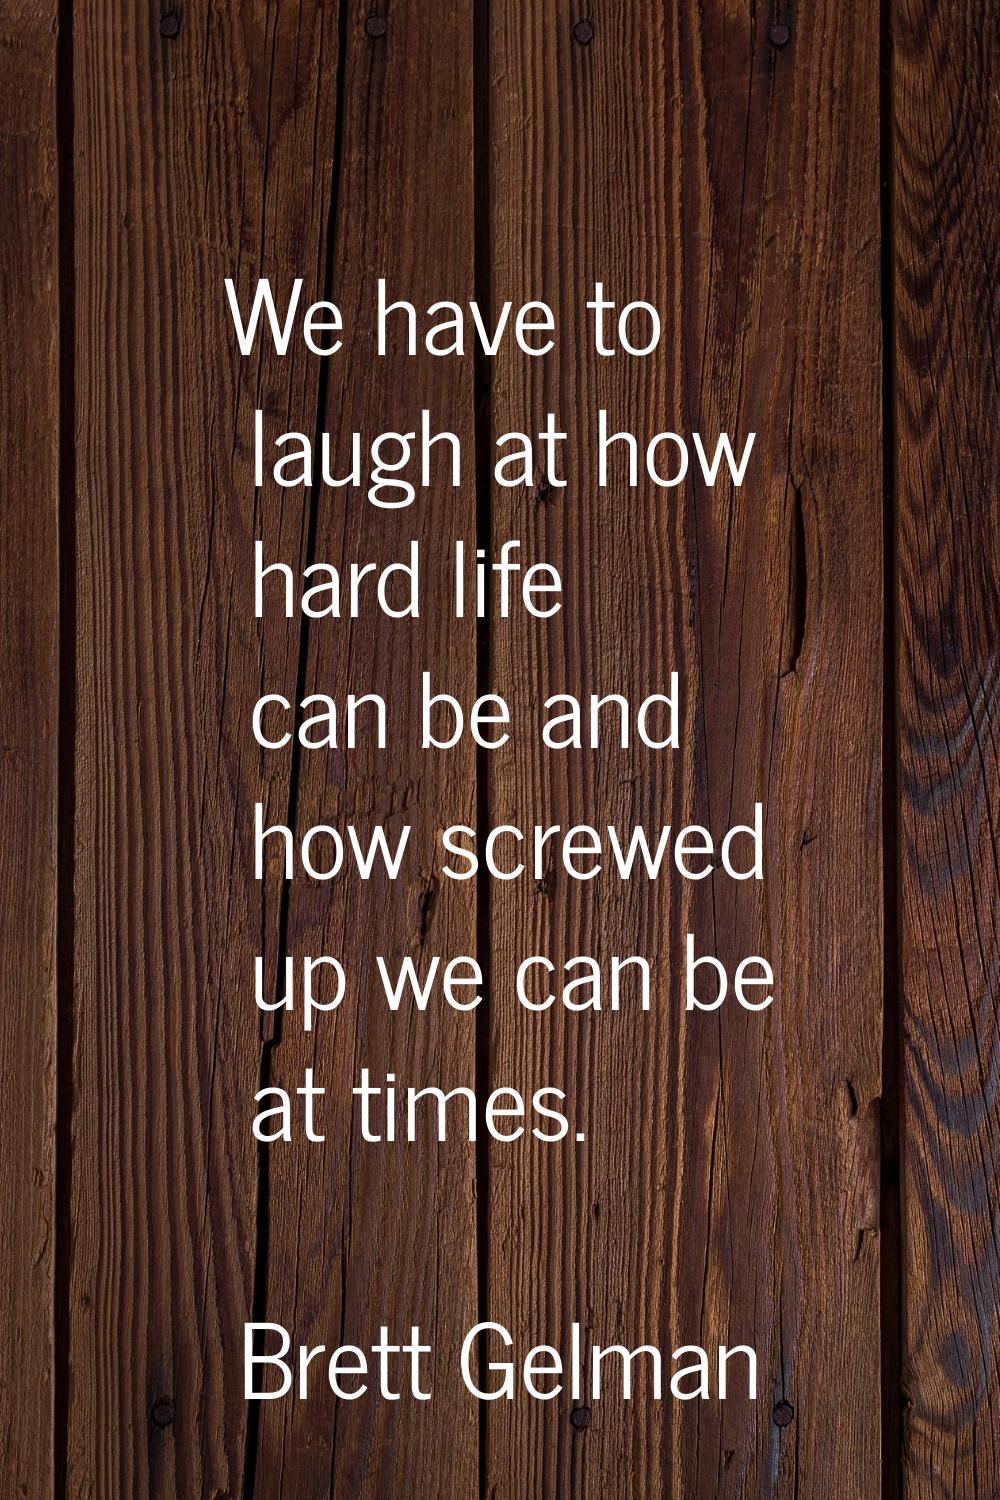 We have to laugh at how hard life can be and how screwed up we can be at times.